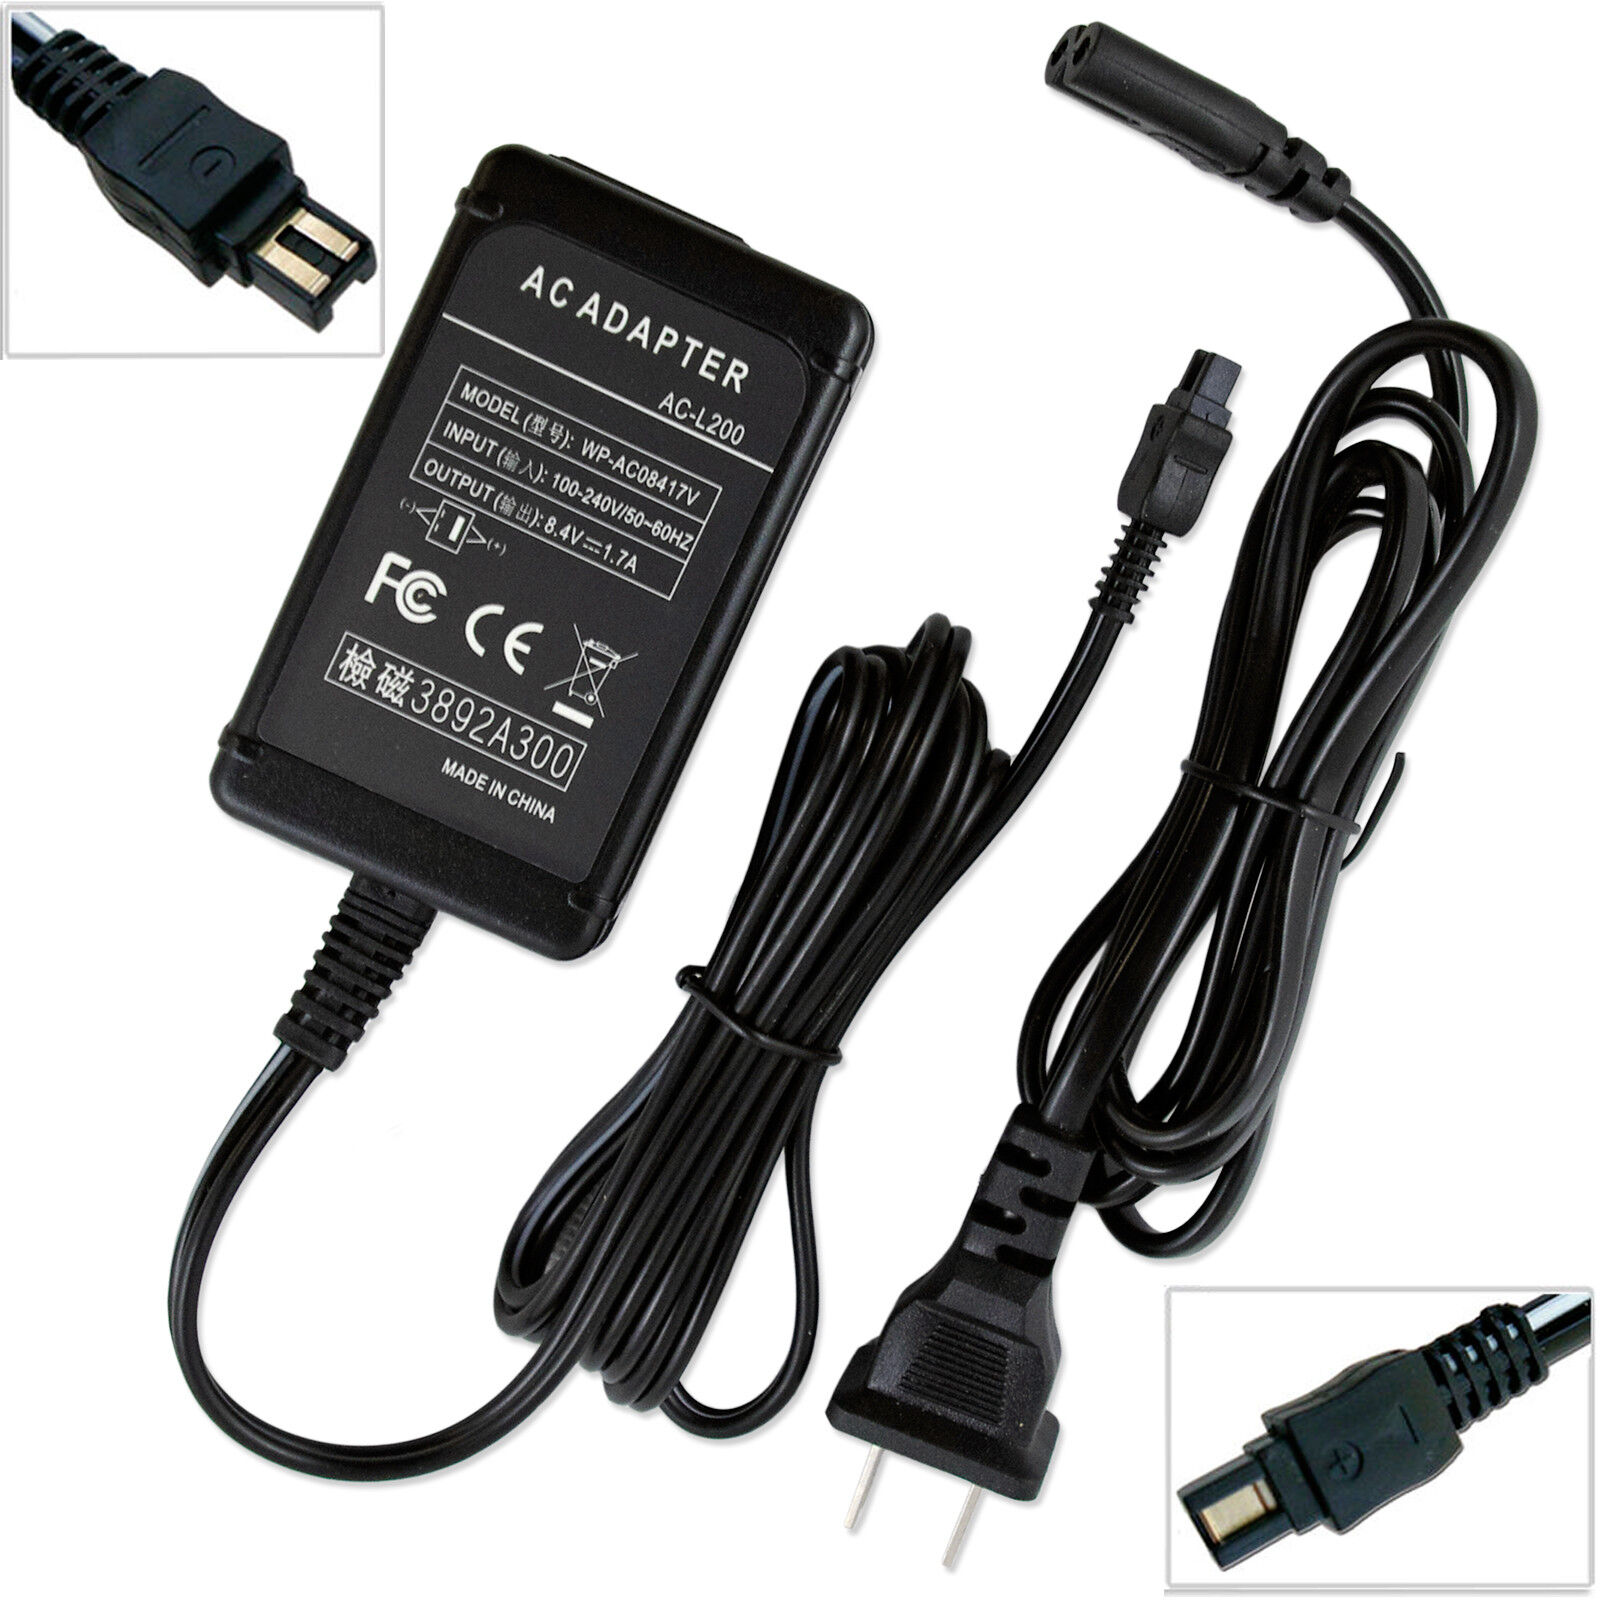 *Brand NEW*Sony Camcorder HDR-SR5 E HDR-SR12 E AC Adapter Battery Charger Power Supply